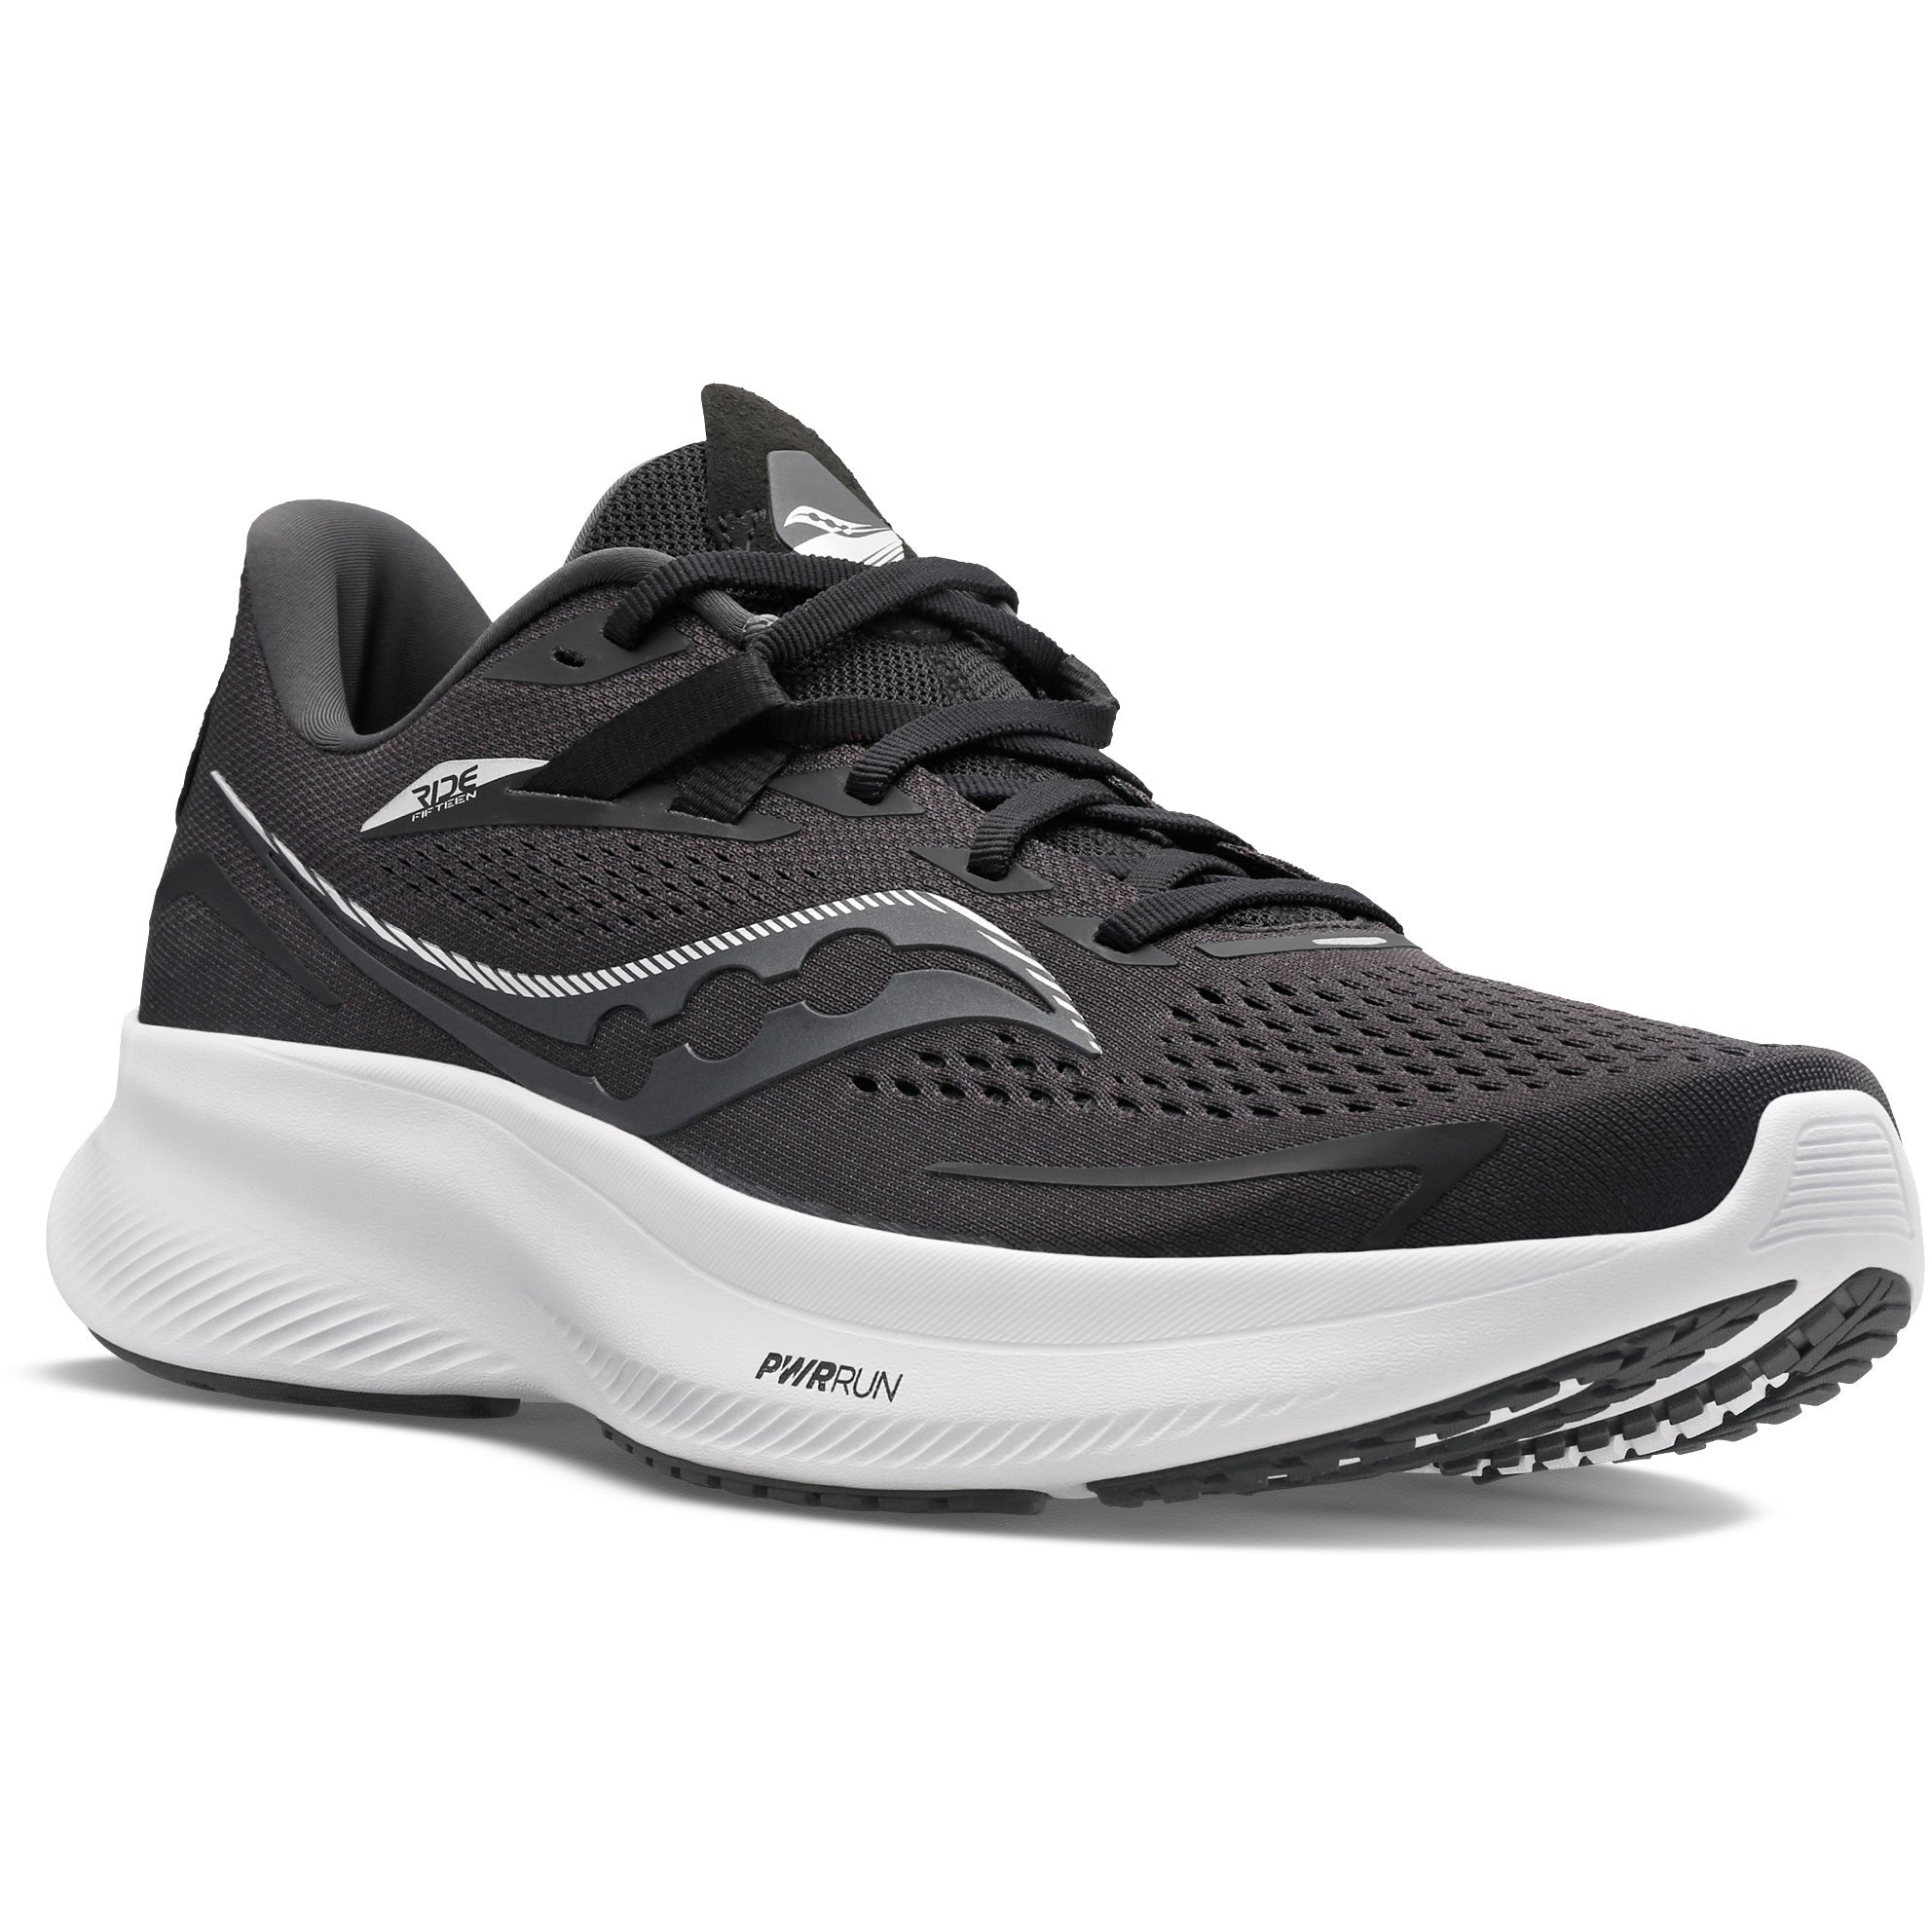 SAUCONY RIDE 15 (WIDE) s20730-05 - Mens Wide Fit Trainer . Saucony Trainers | Wisemans | Bantry | West Cork | Munster | Ireland